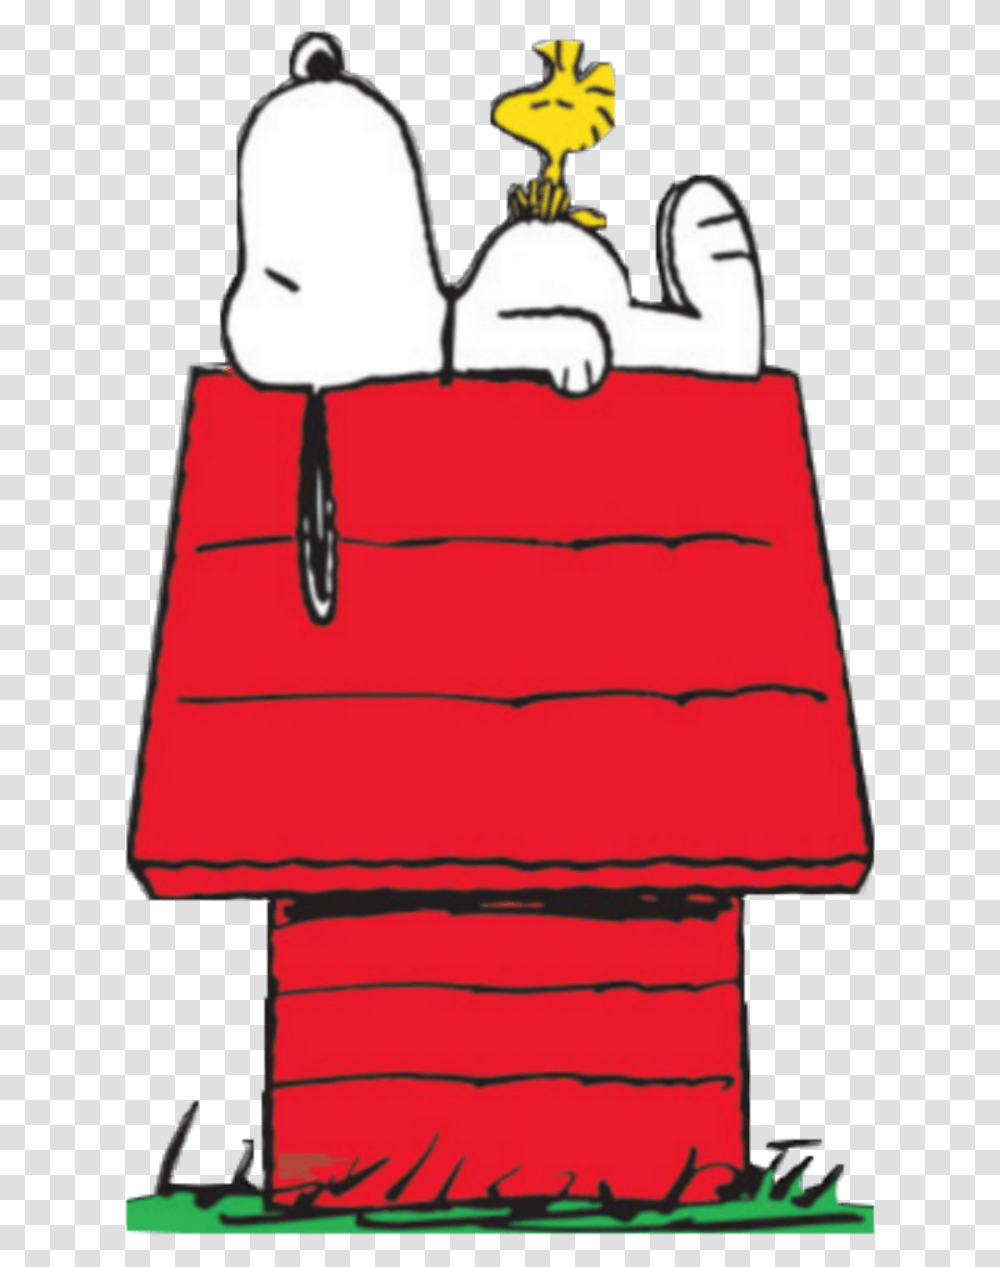 Peanuts Book Featuring Snoopy Book Download Snoopy Lying On Dog House, Apparel, Lifejacket, Vest Transparent Png